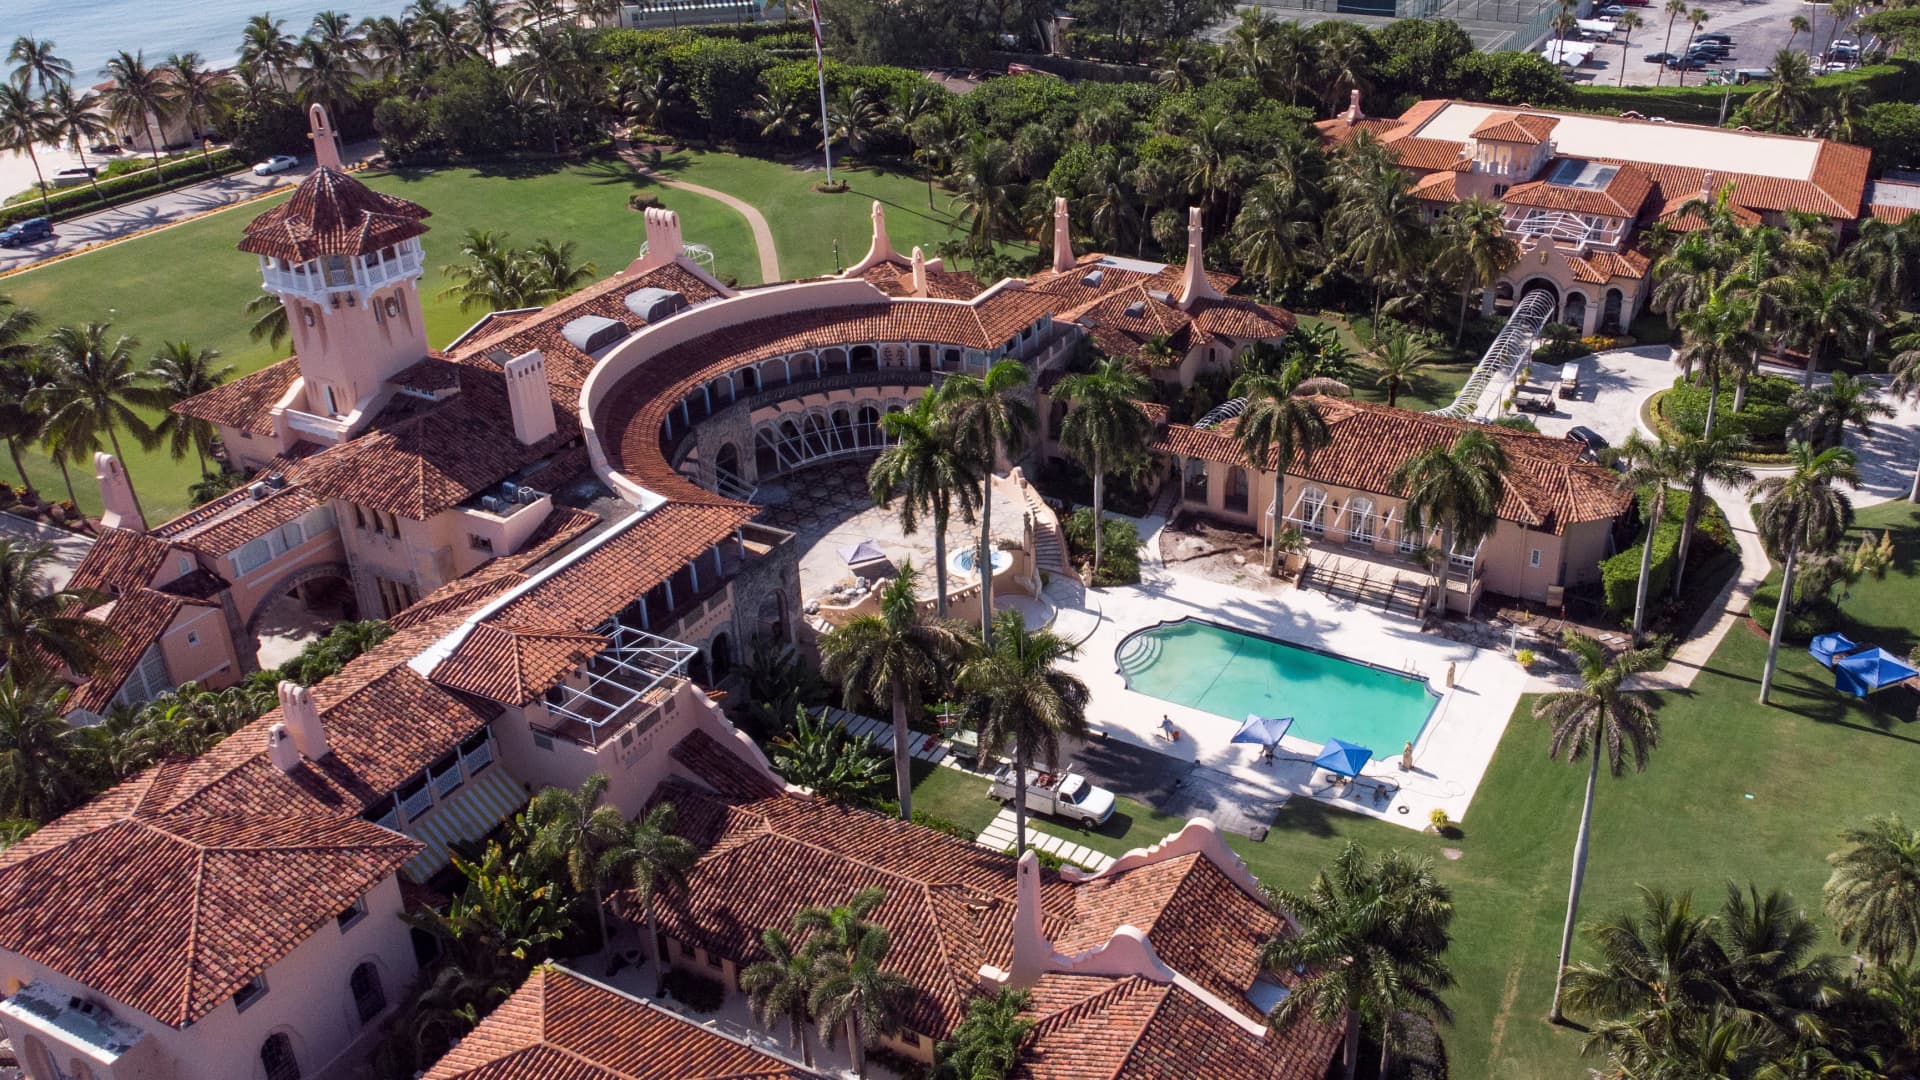 An aerial view of former U.S. President Donald Trump's Mar-a-Lago home after Trump said that FBI agents raided it, in Palm Beach, Florida, U.S. August 15, 2022.